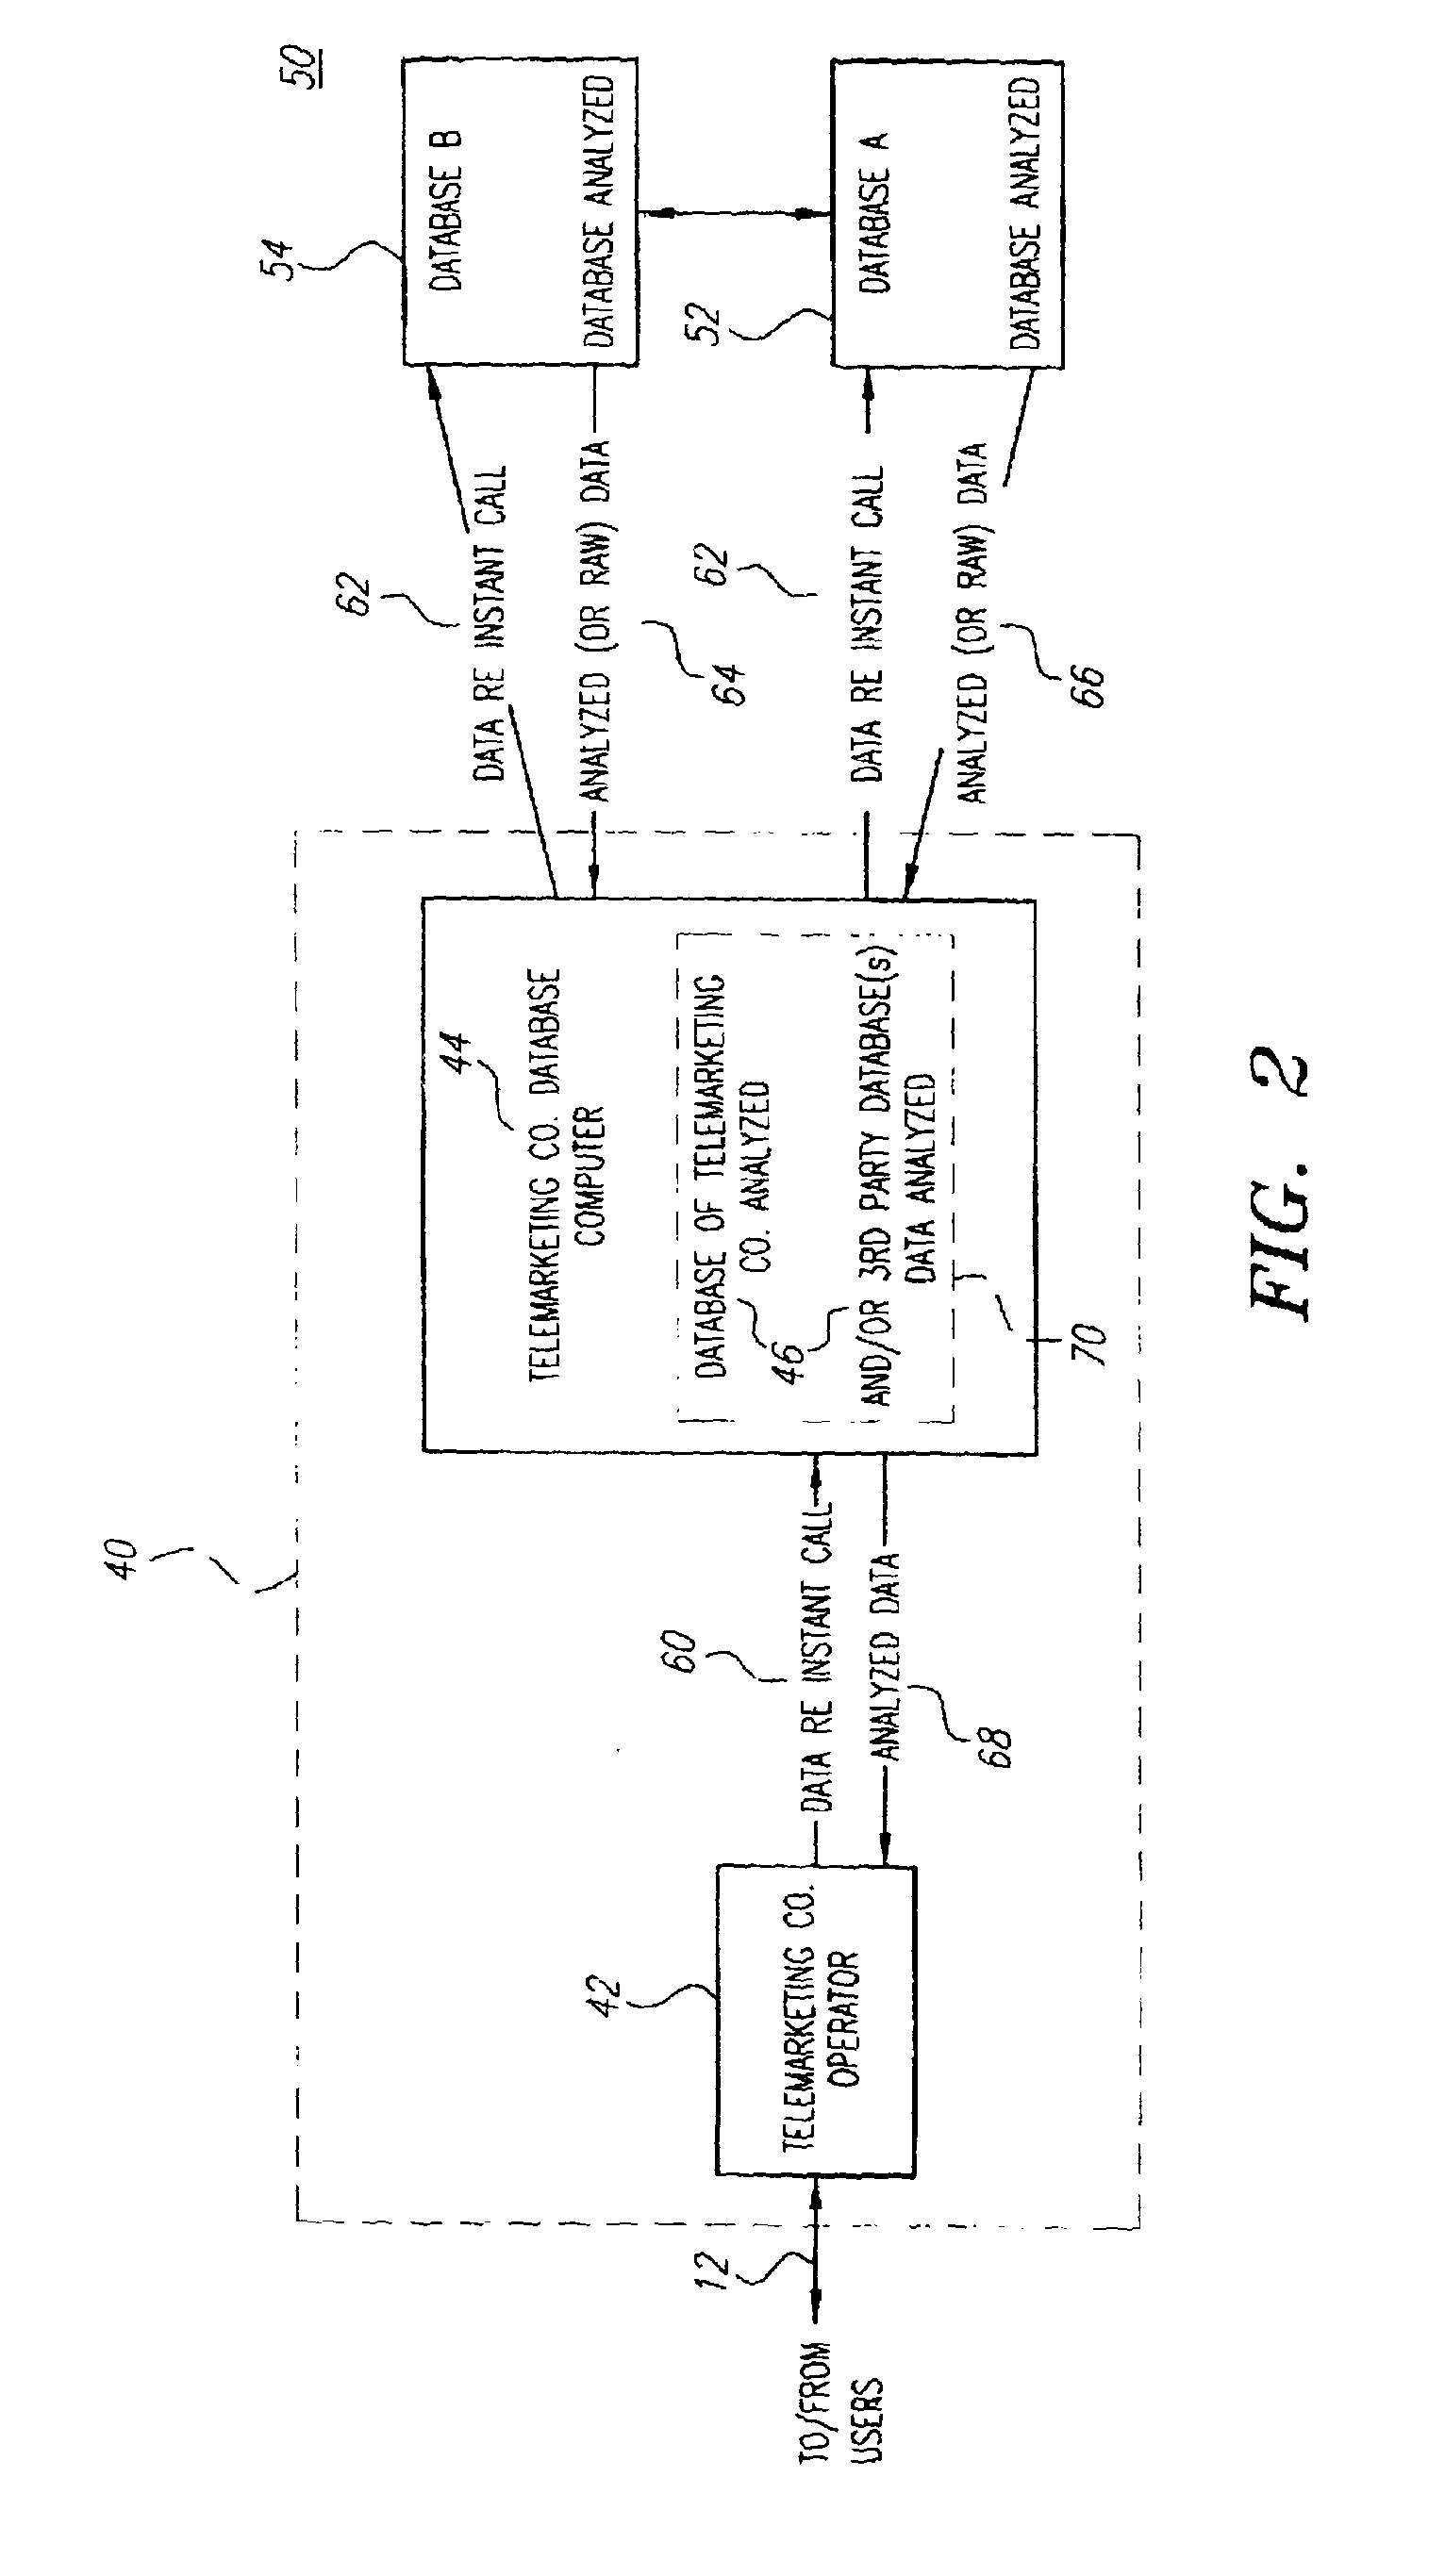 Method and system for providing real time offers to a user based on obsolescence of possessed items